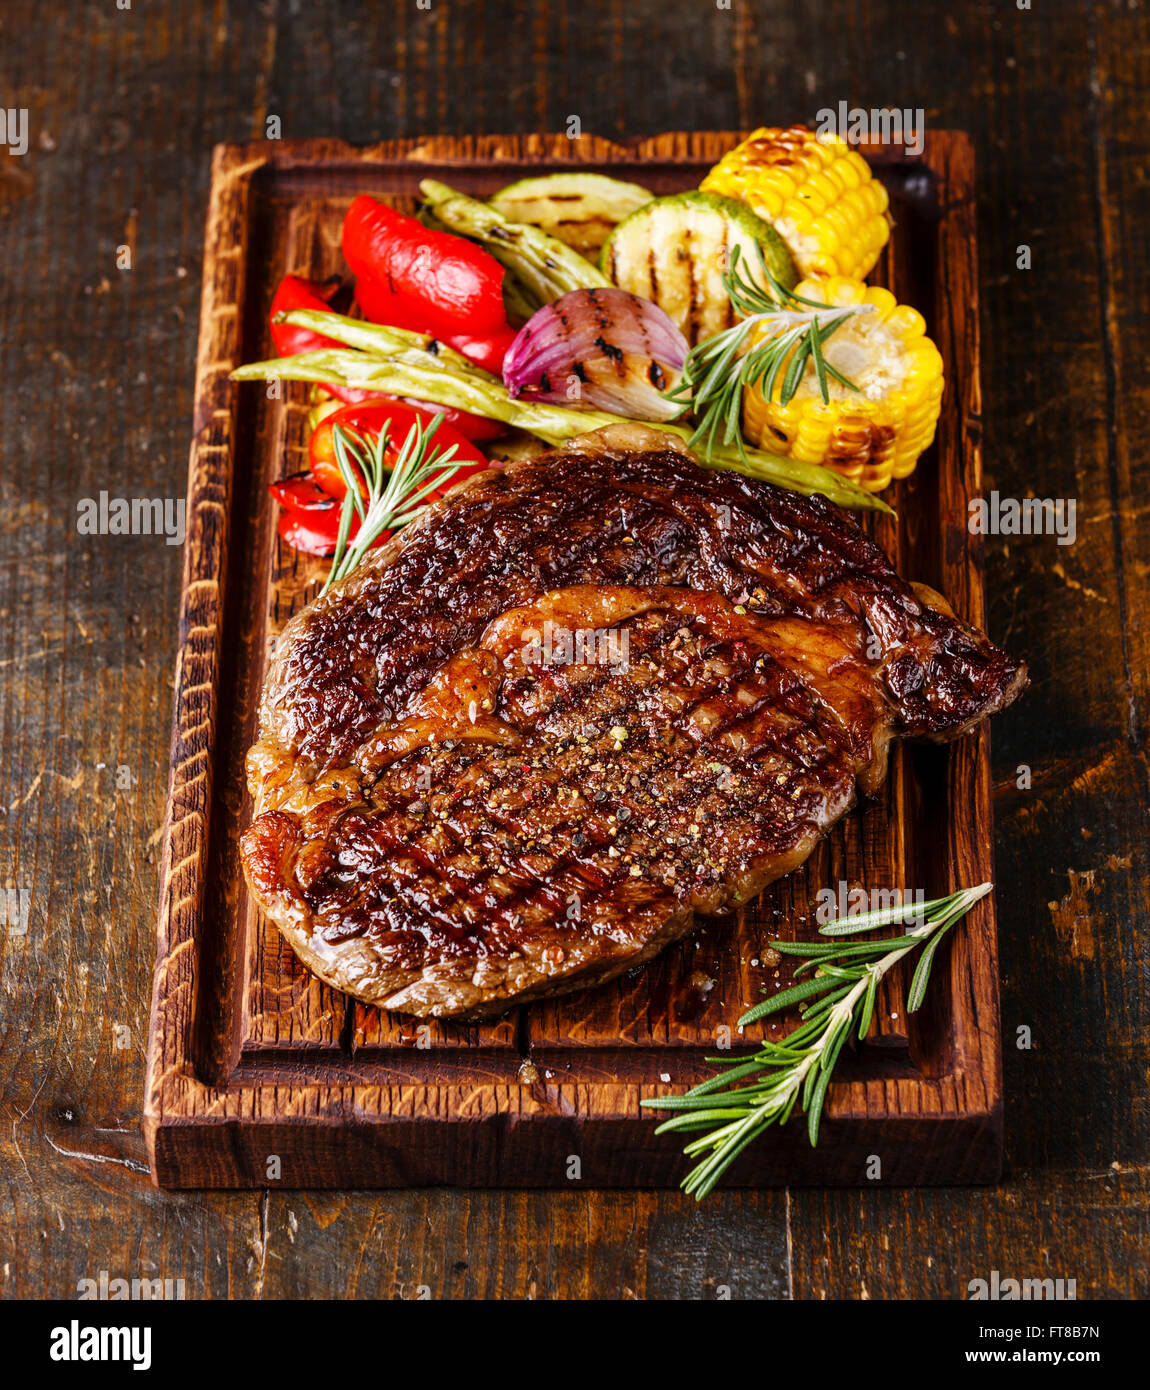 Grilled beef barbecue Ribeye steak and Grilled vegetables on cutting board on dark background Stock Photo